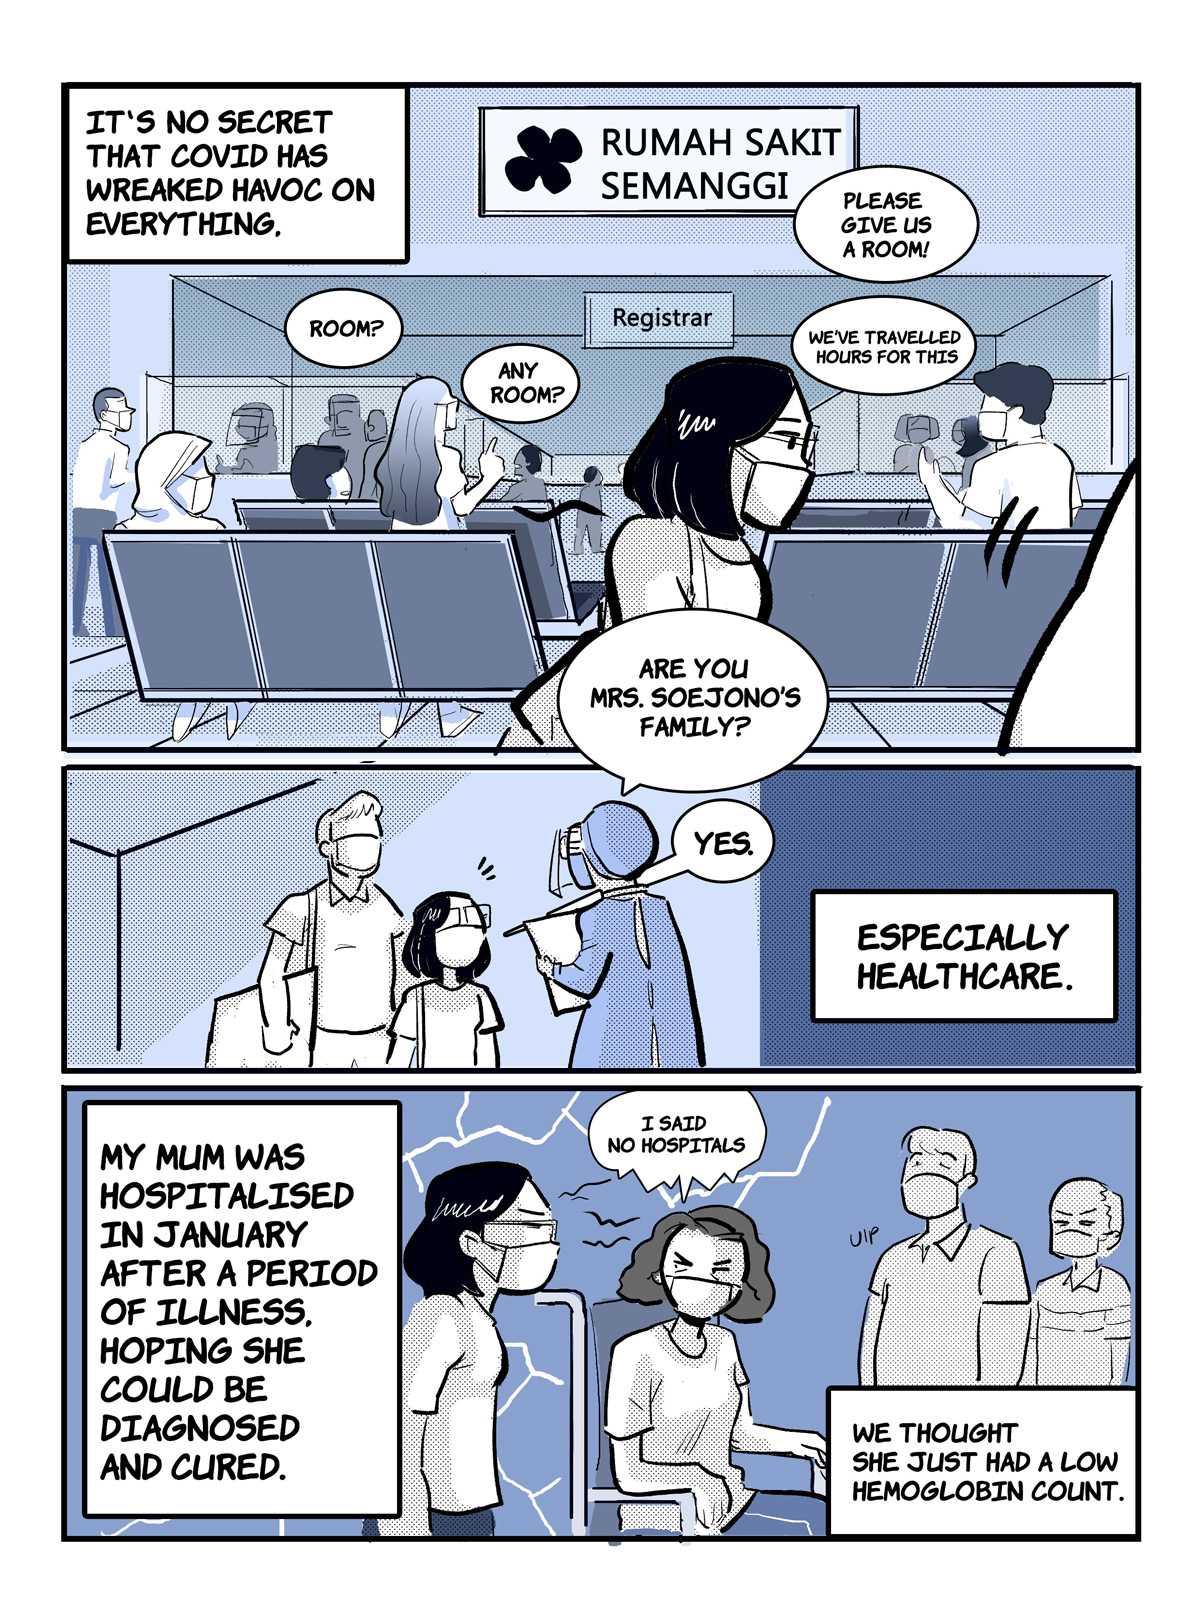 A comic page of 3 panels in black and various shades of blue and grey. The narration is provided in caption boxes.
Panel 1. Narrator (Stephani): "It's no secret that Covid has wreaked havoc on everything". The waiting section of a hospital in Jakarta, Indonesia, is full of people, begging to be given a room. "Please give us a room! We've travelled hours for this," some of them say.
Panel 2. A nurse approaches Stephani and her father and asks, "Are you Mrs. Soejono's family?". "Yes," replies Stephani. Narrator: "Especially healthcare."
Panel 3. Narrator: "My mum was hospitalised in January after a period of illness, hoping she could be diagnosed and cured. We thought she just had a low hemoglobin count." Flanked by her husband and daughter, Stephani's mum sits in a wheelchair, grumpily muttering "I said no hospitals". 